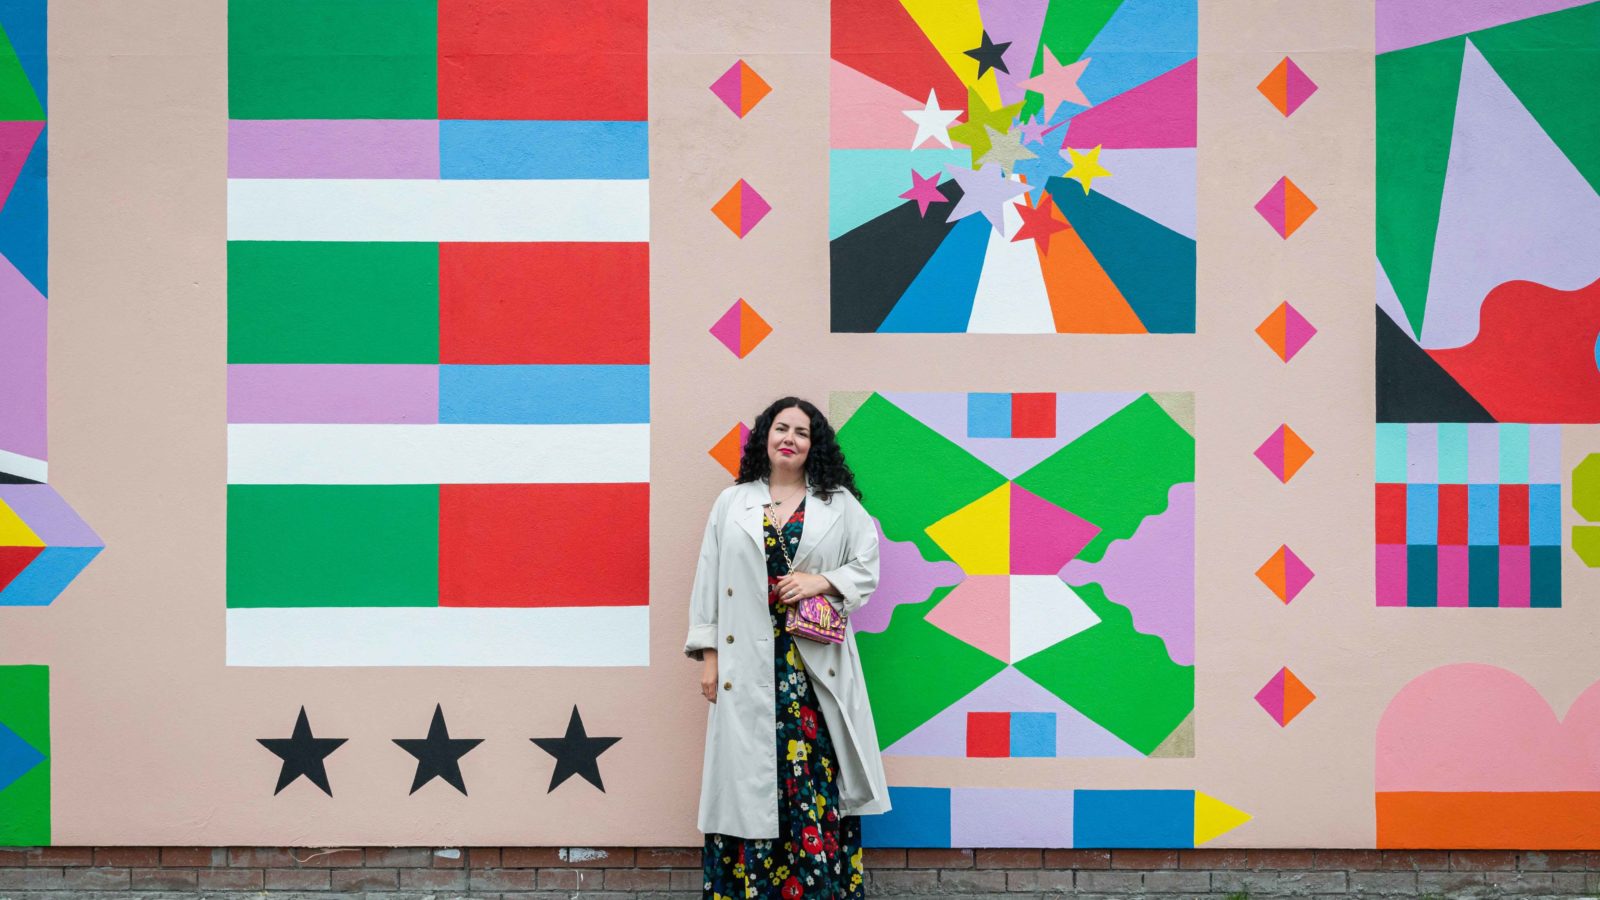 Cherie smiles at the camera in front of the mural. She has long, black curly hair and wears a floral dress with a raincoat over it and red lipstick.